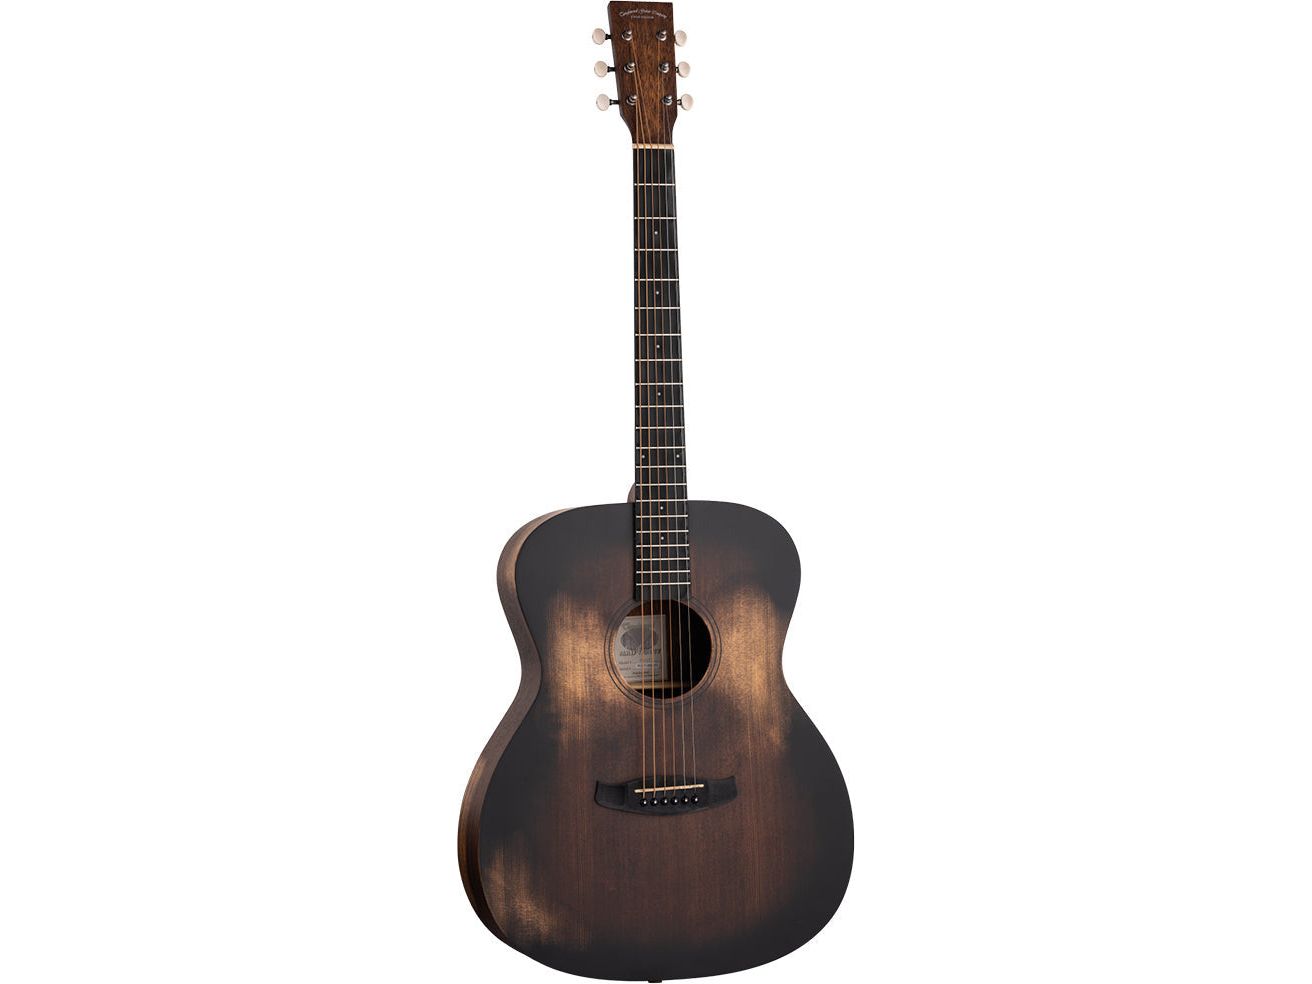 Tanglewood Auld Trinity TWOT2 'Folk' Acoustic Guitar in Natural Distressed Satin